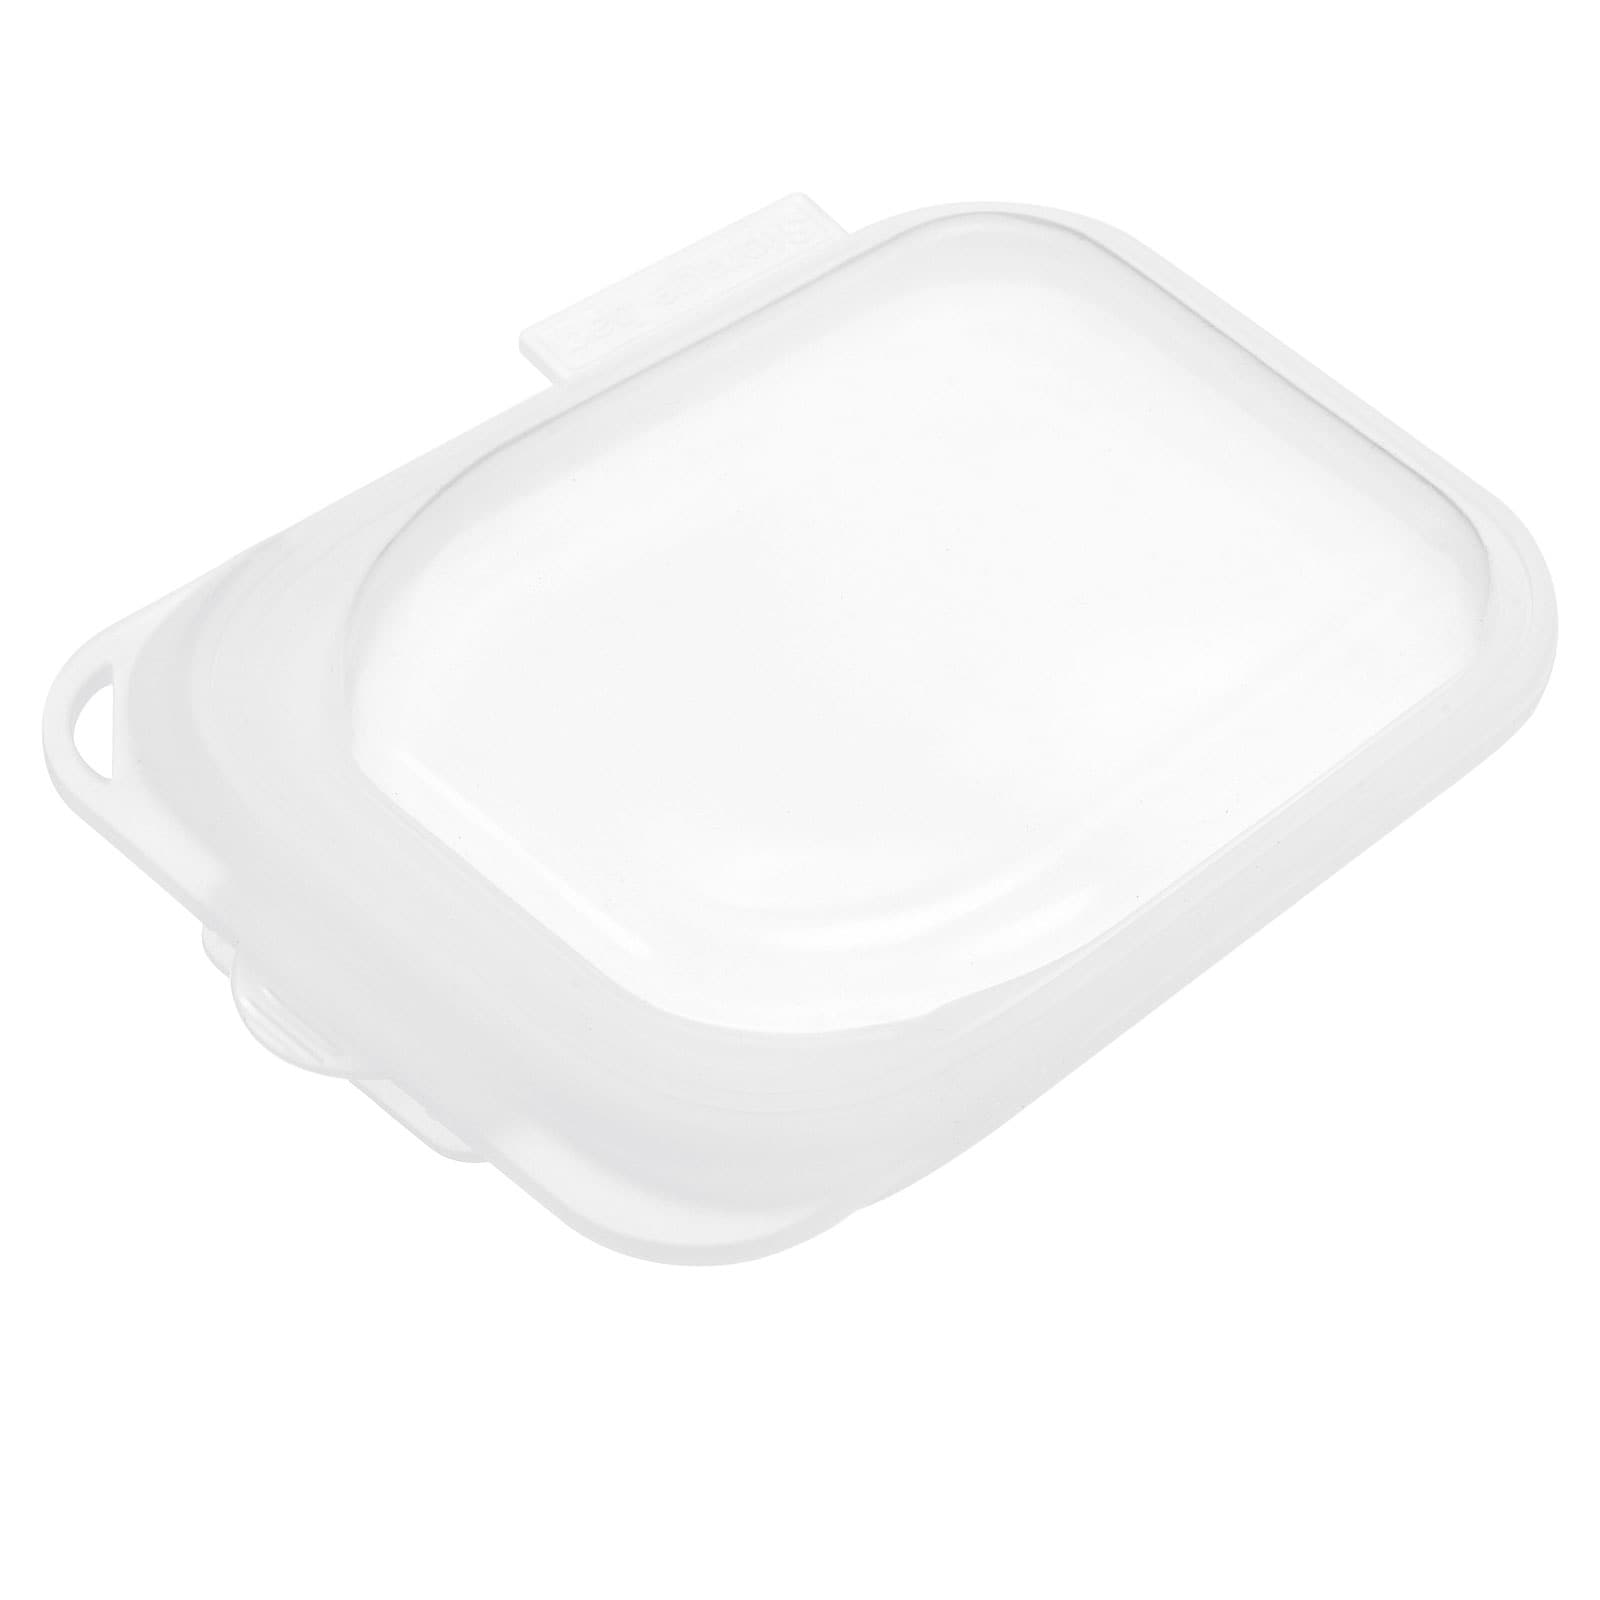 https://ak1.ostkcdn.com/images/products/is/images/direct/a1d6ab027735ba656d8e96a00abf128001575b05/Reusable-Food-Storage-Bags-Silicone-Freezer-Bags-Seal-Pouch-Bags-Blue-Small.jpg